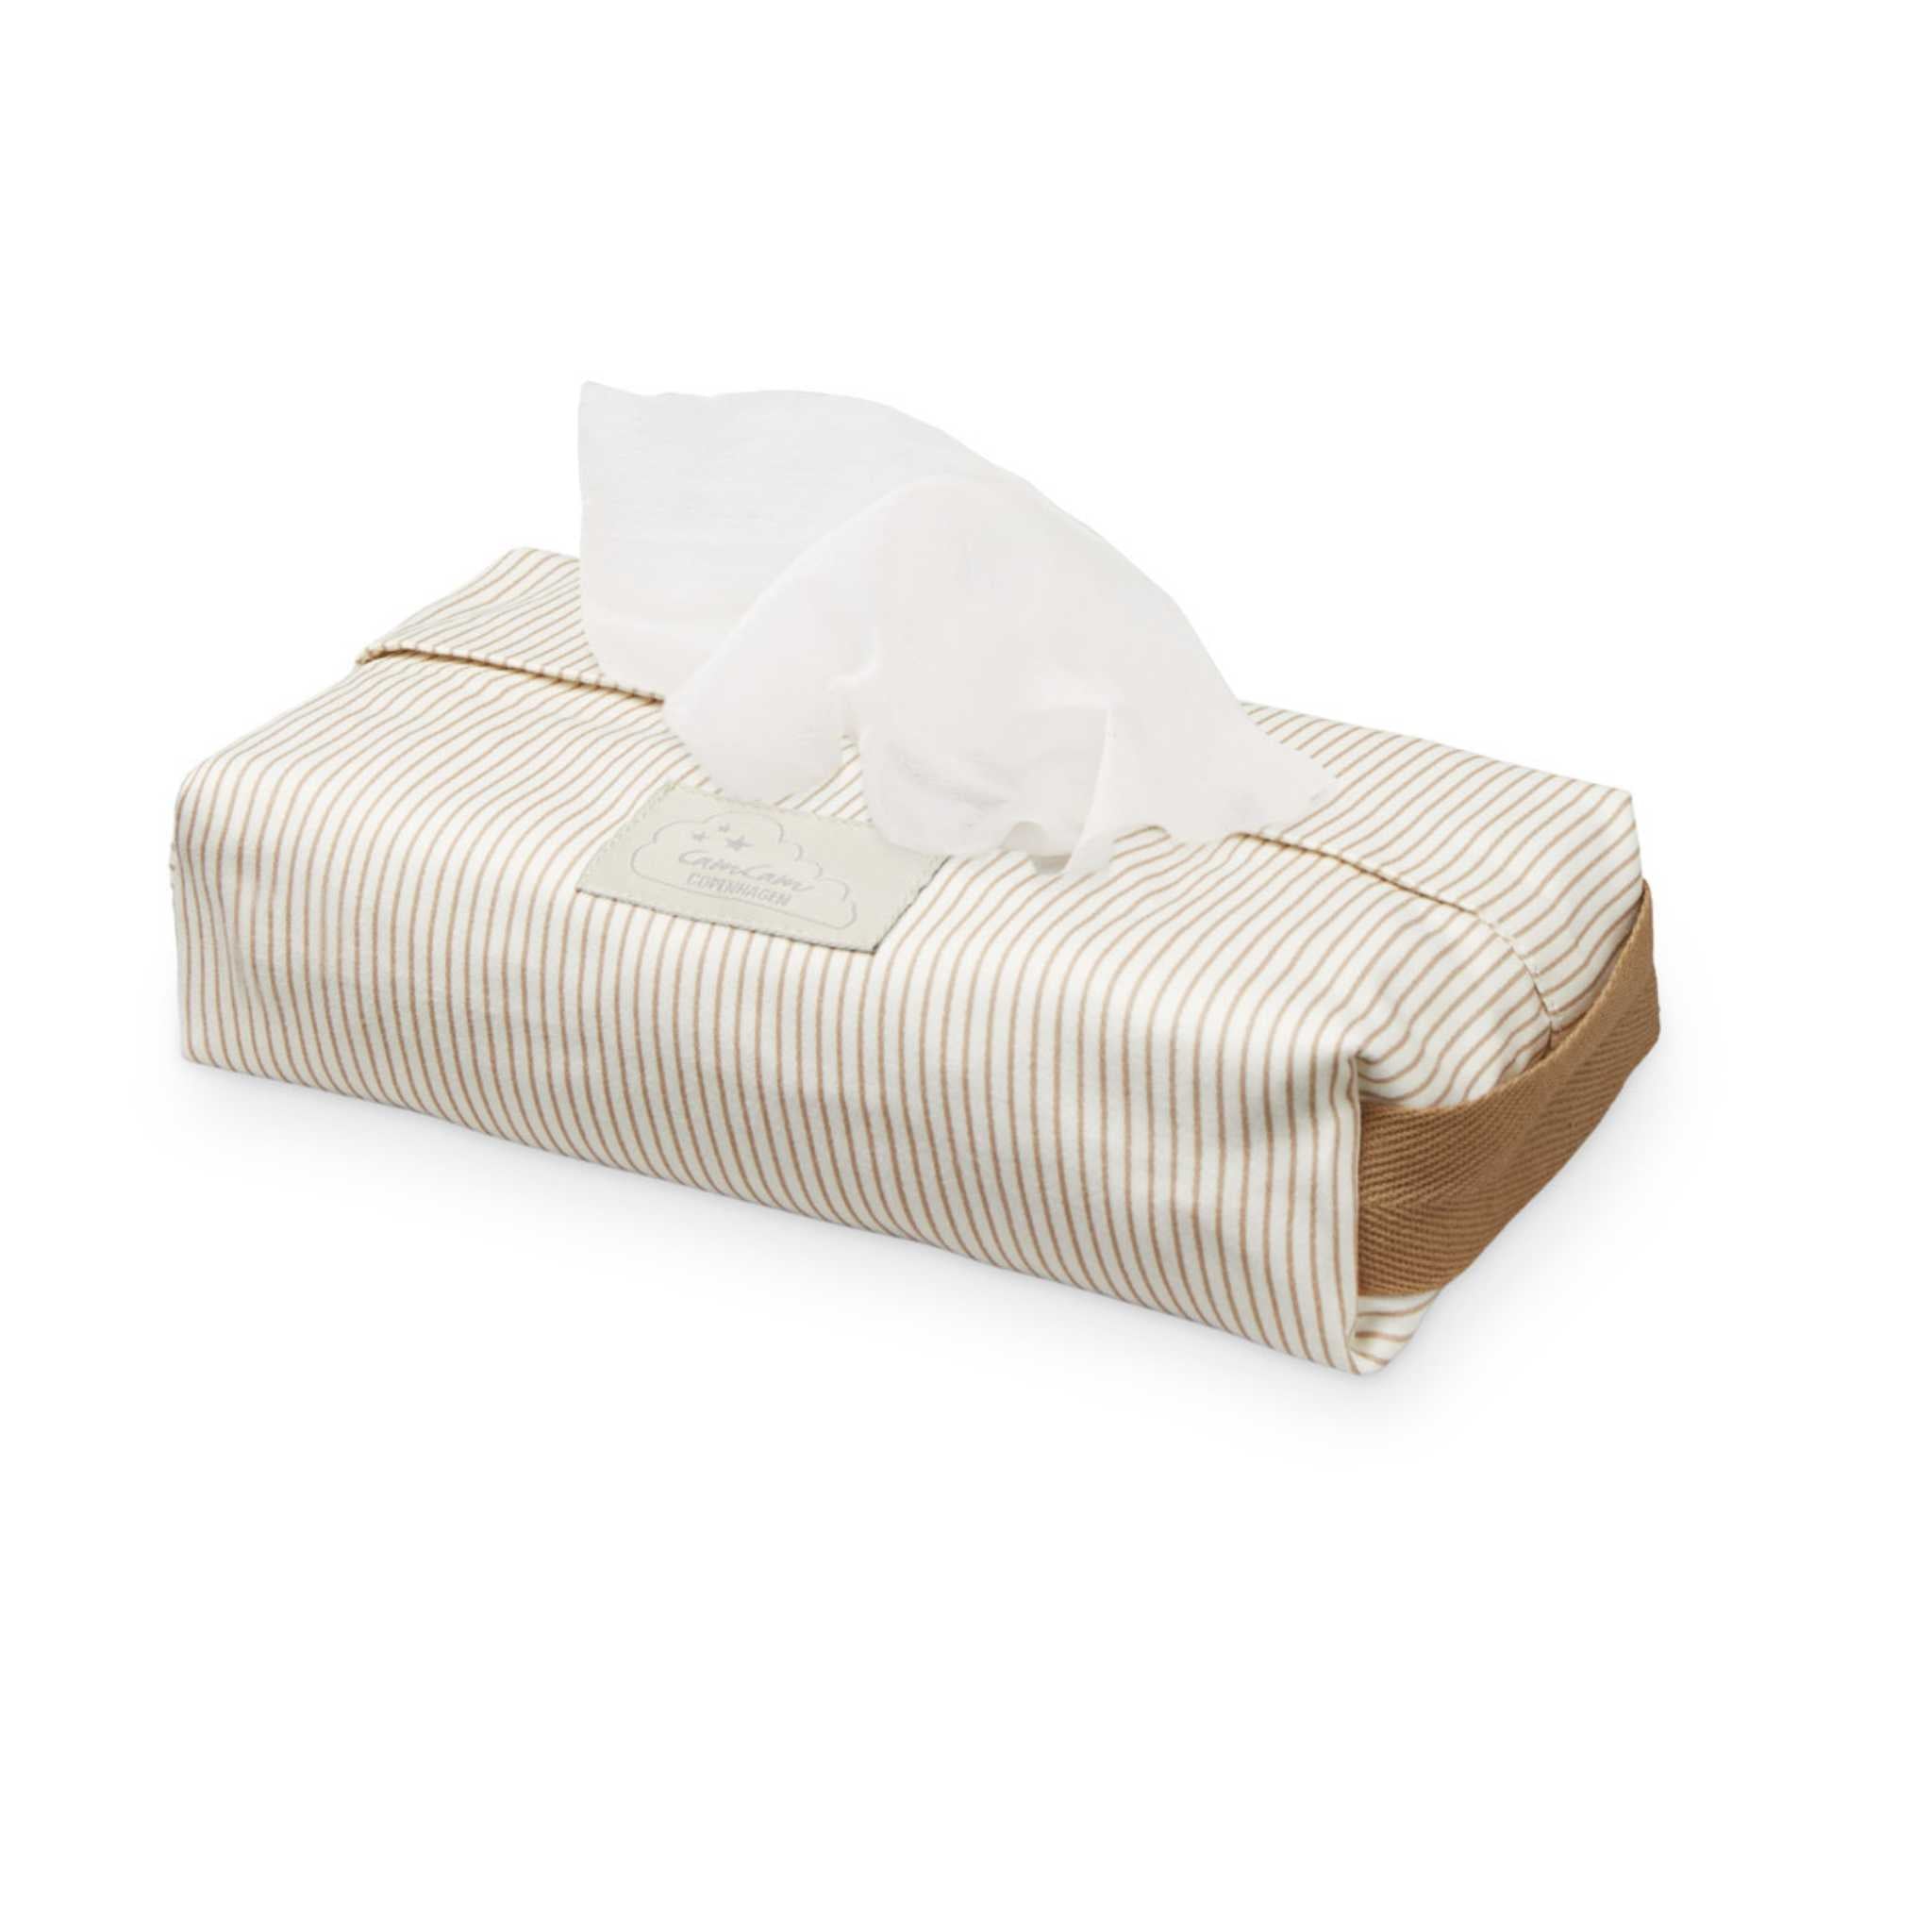 Cam Cam Wet Wipe Cover in Camel Stripes - Main Image